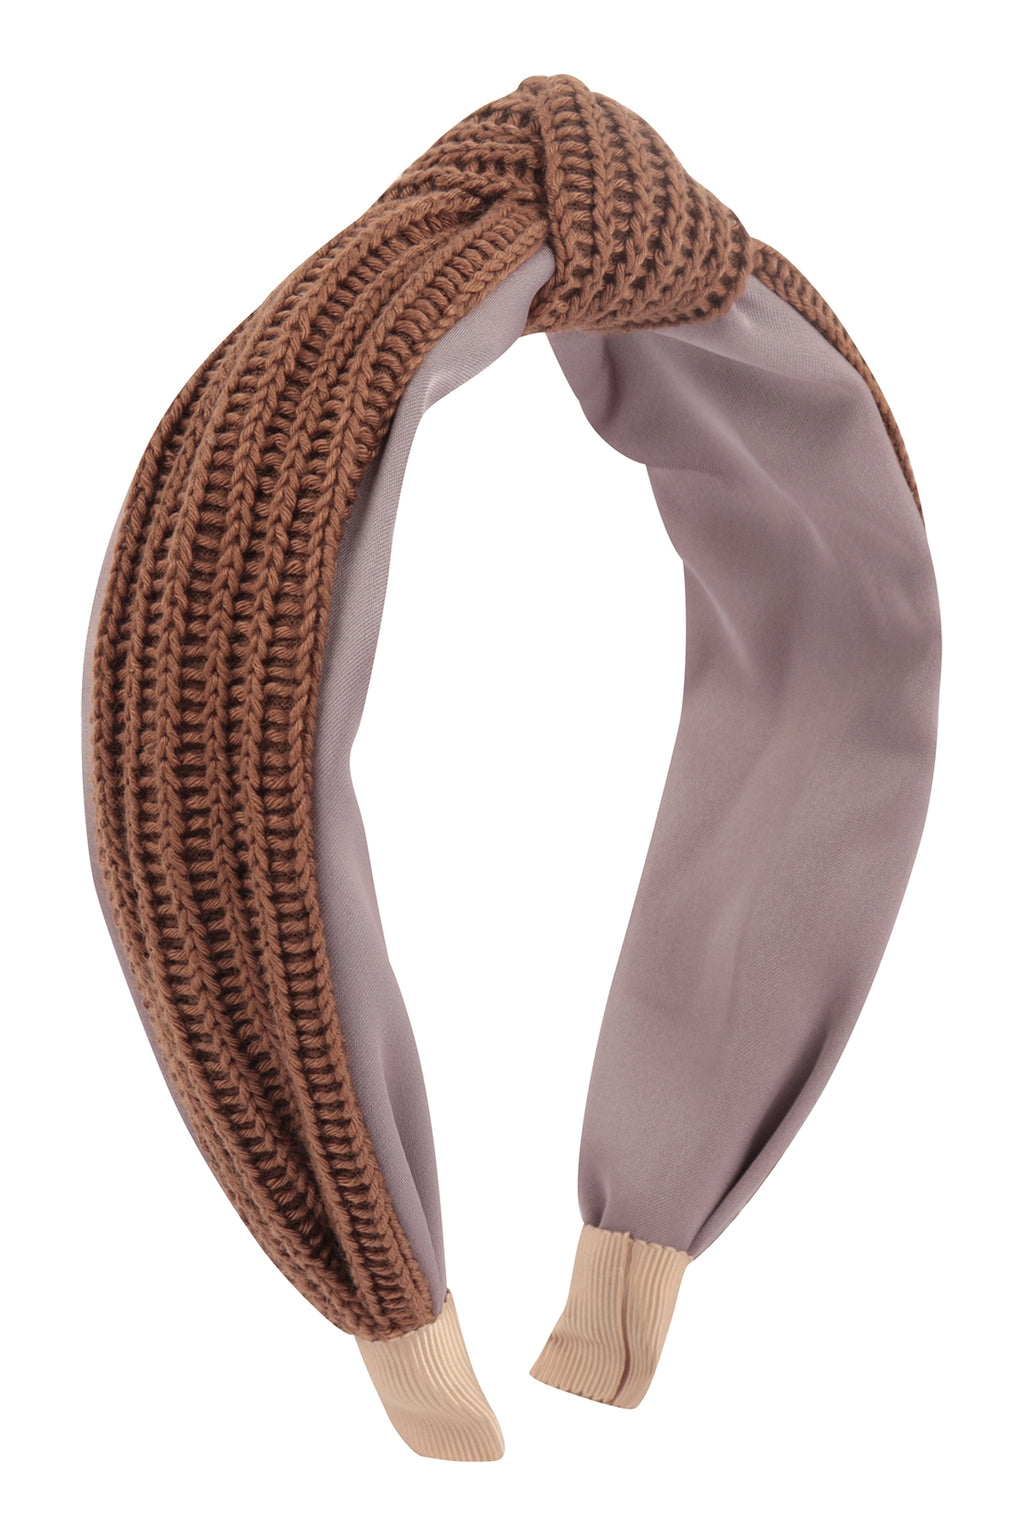 Knitted Knot Headband Hair Accessories Brown - Pack of 6